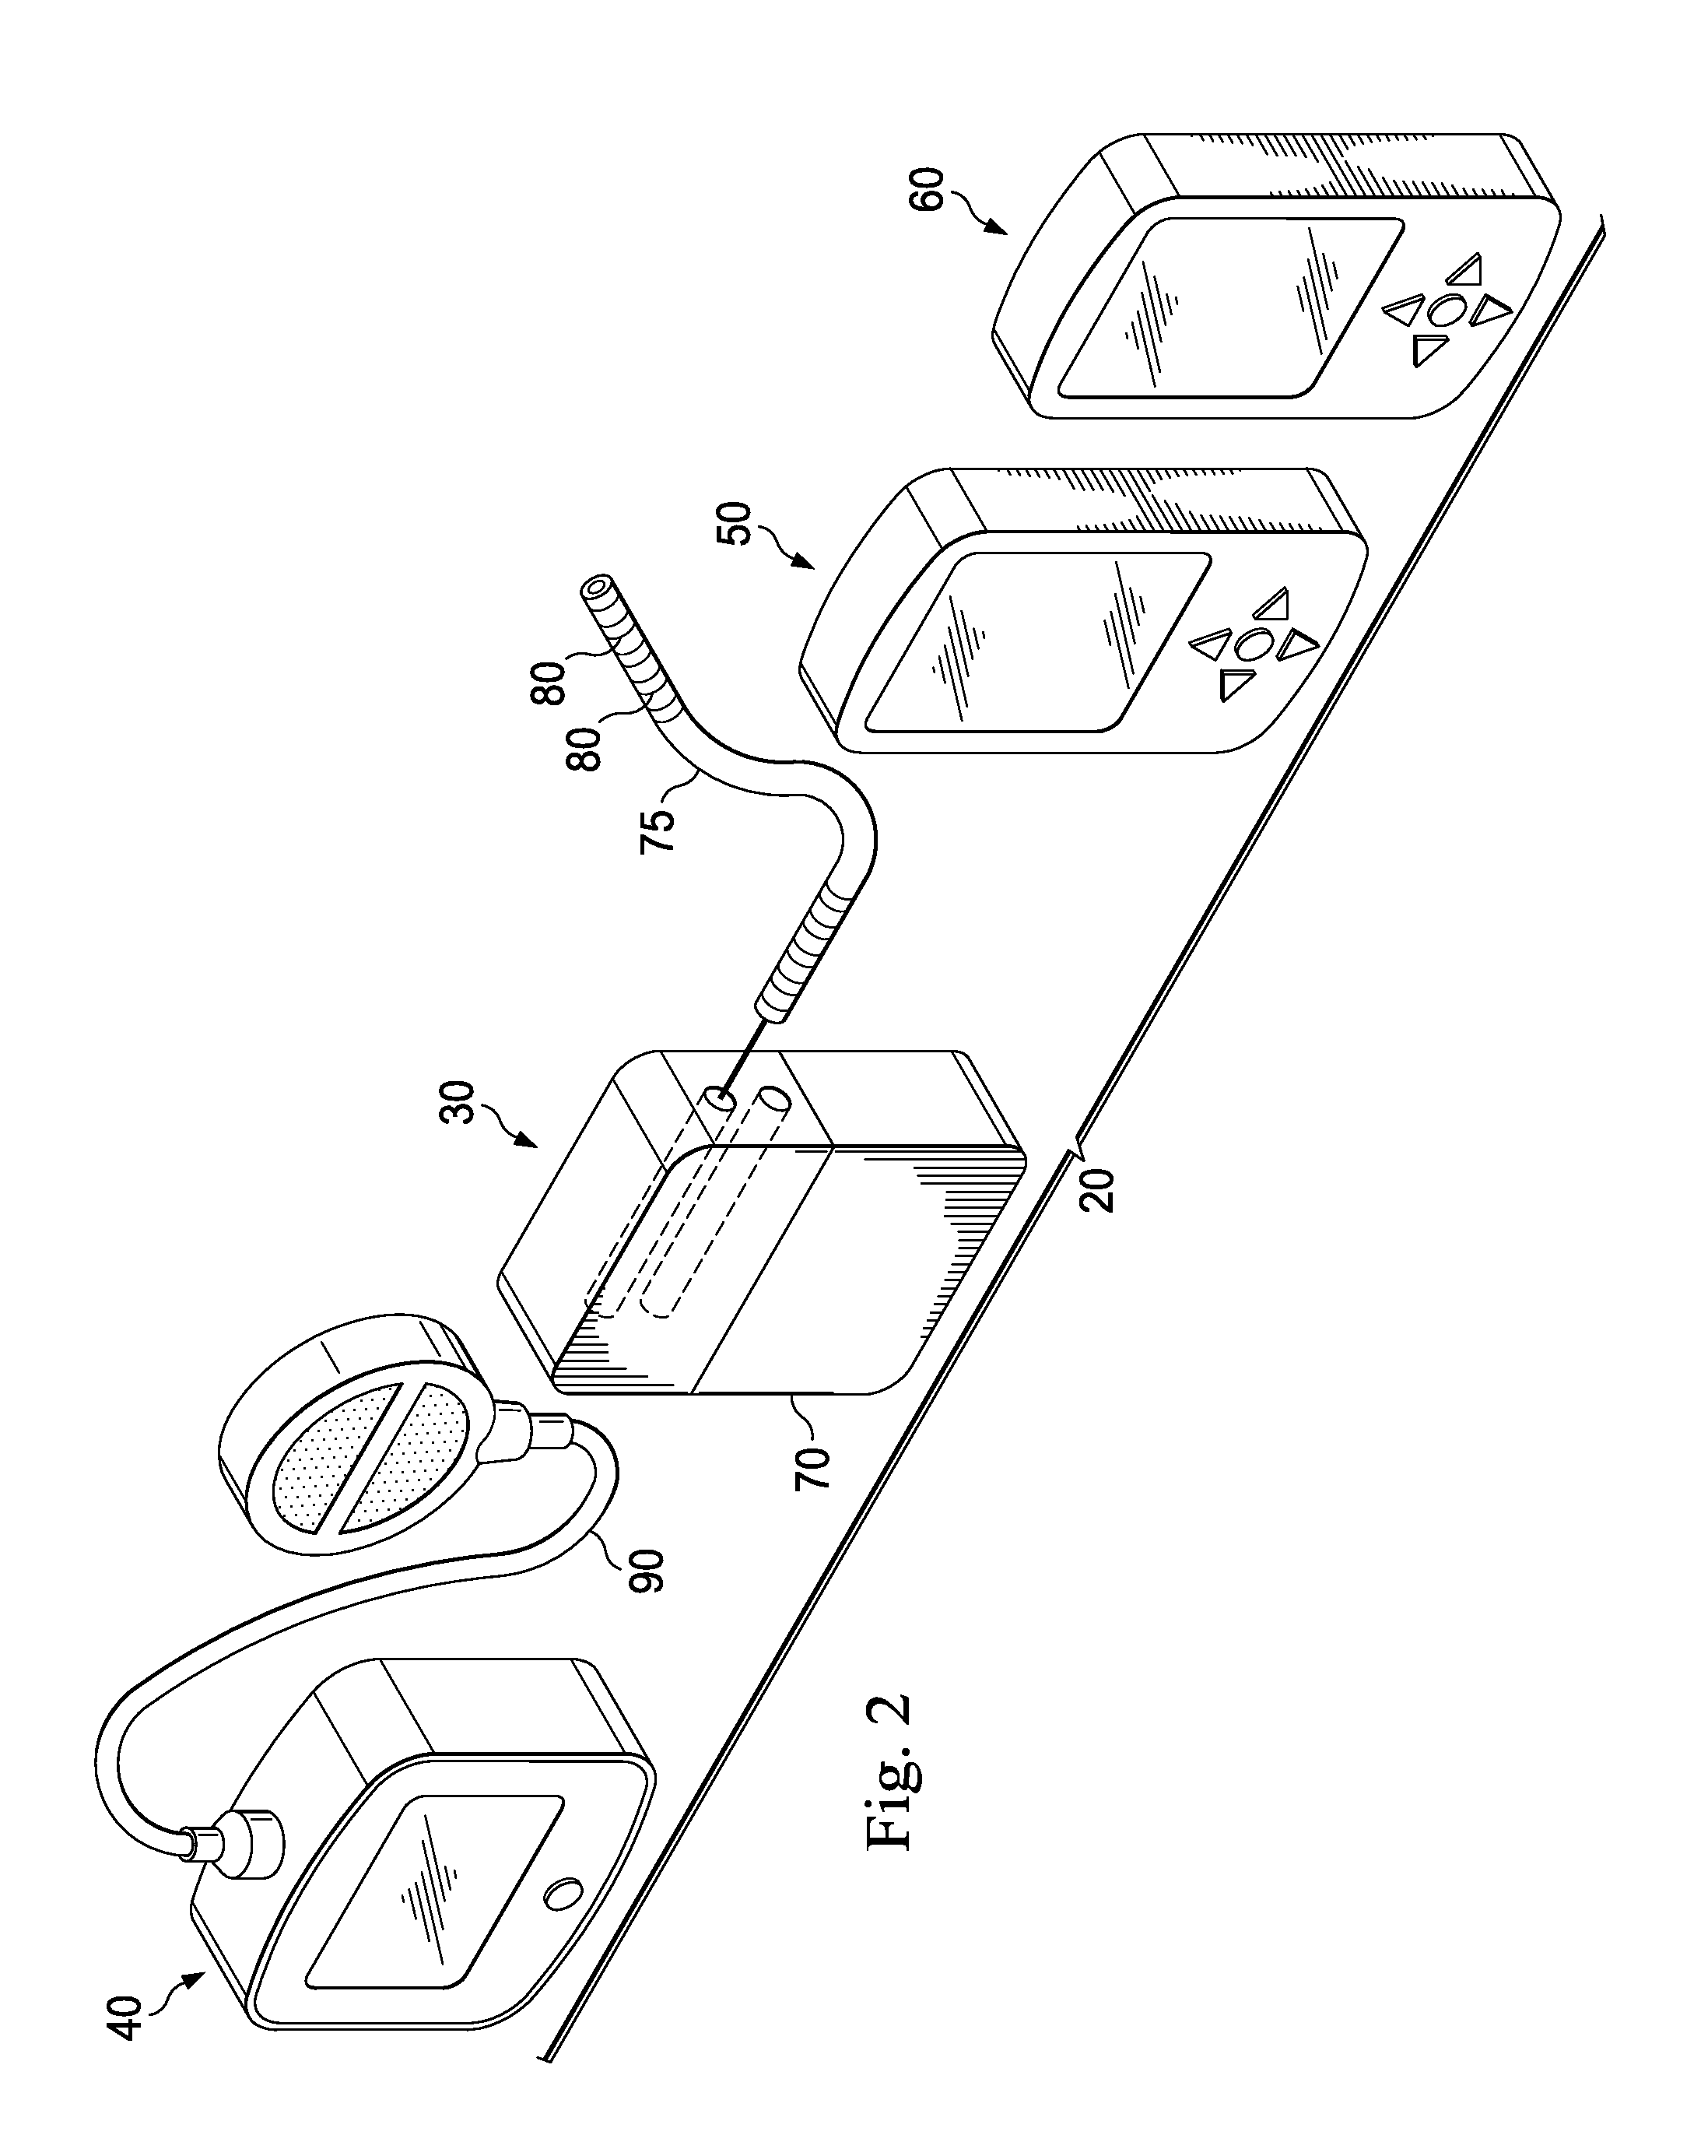 System and method for improving nerve finding for peripheral nerve stimulation